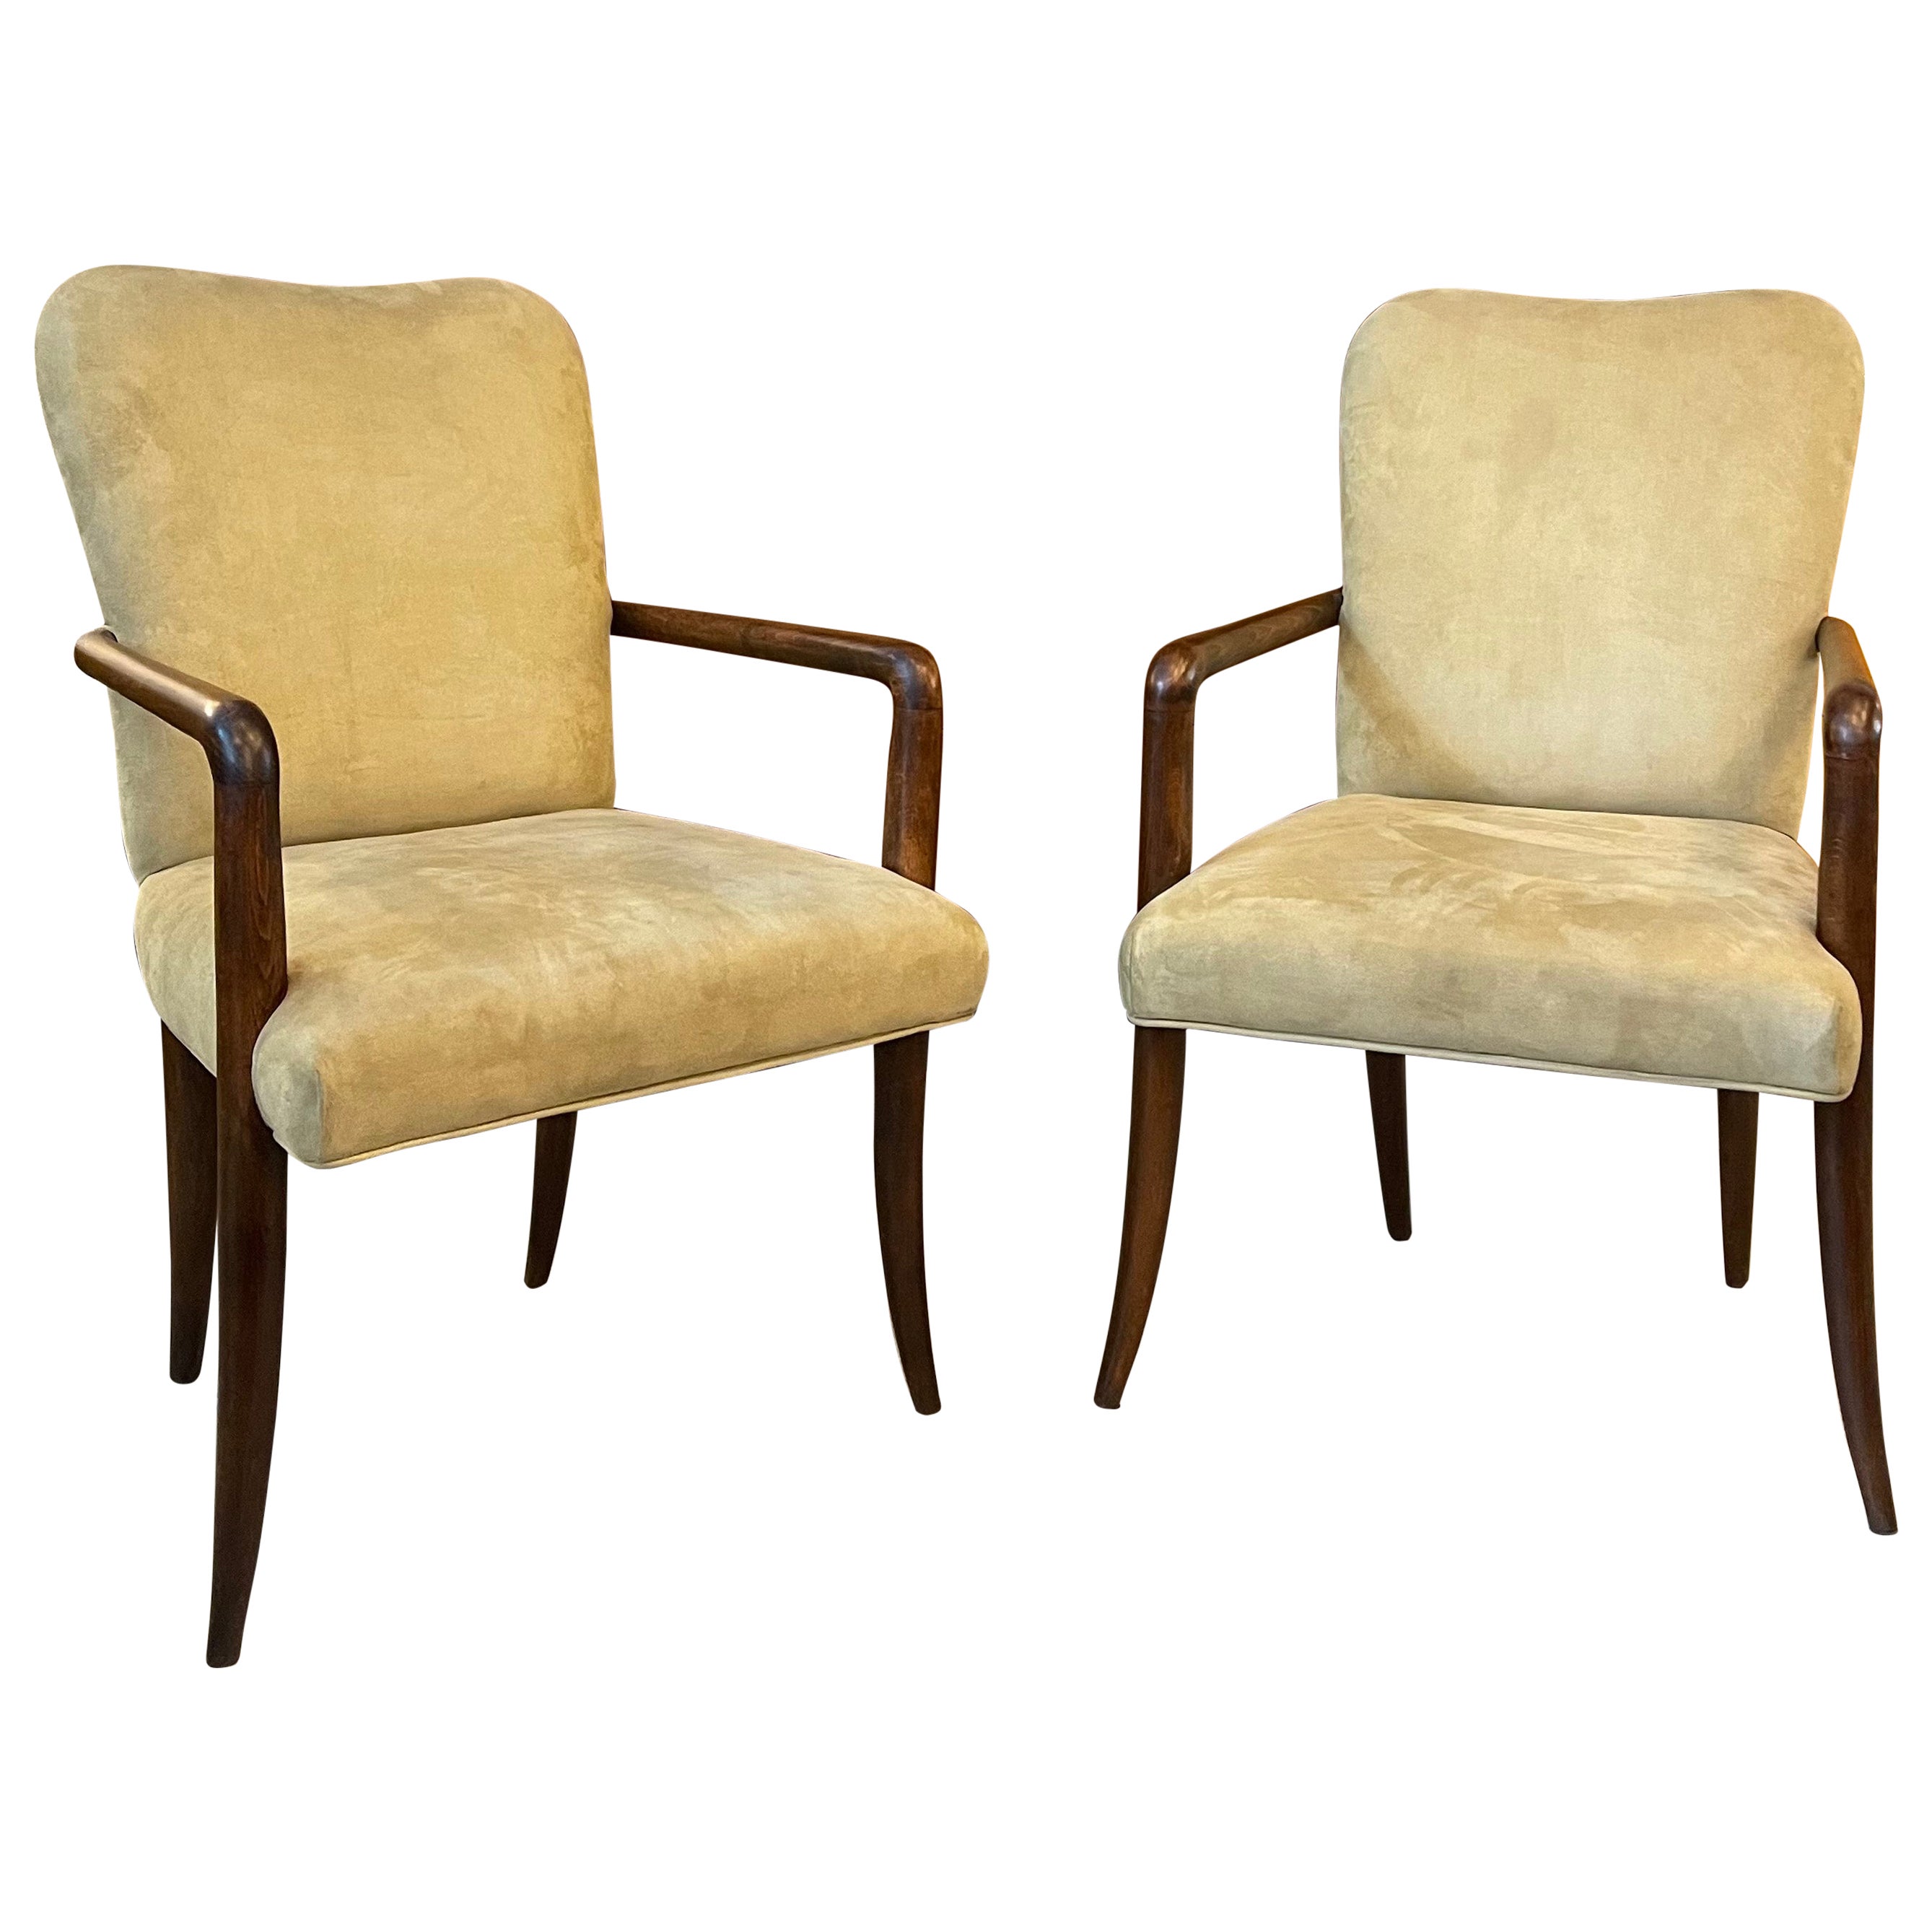 Pair Of Mid-Century Modern UltraSuede And Oak Sabre Leg Armchairs For Sale